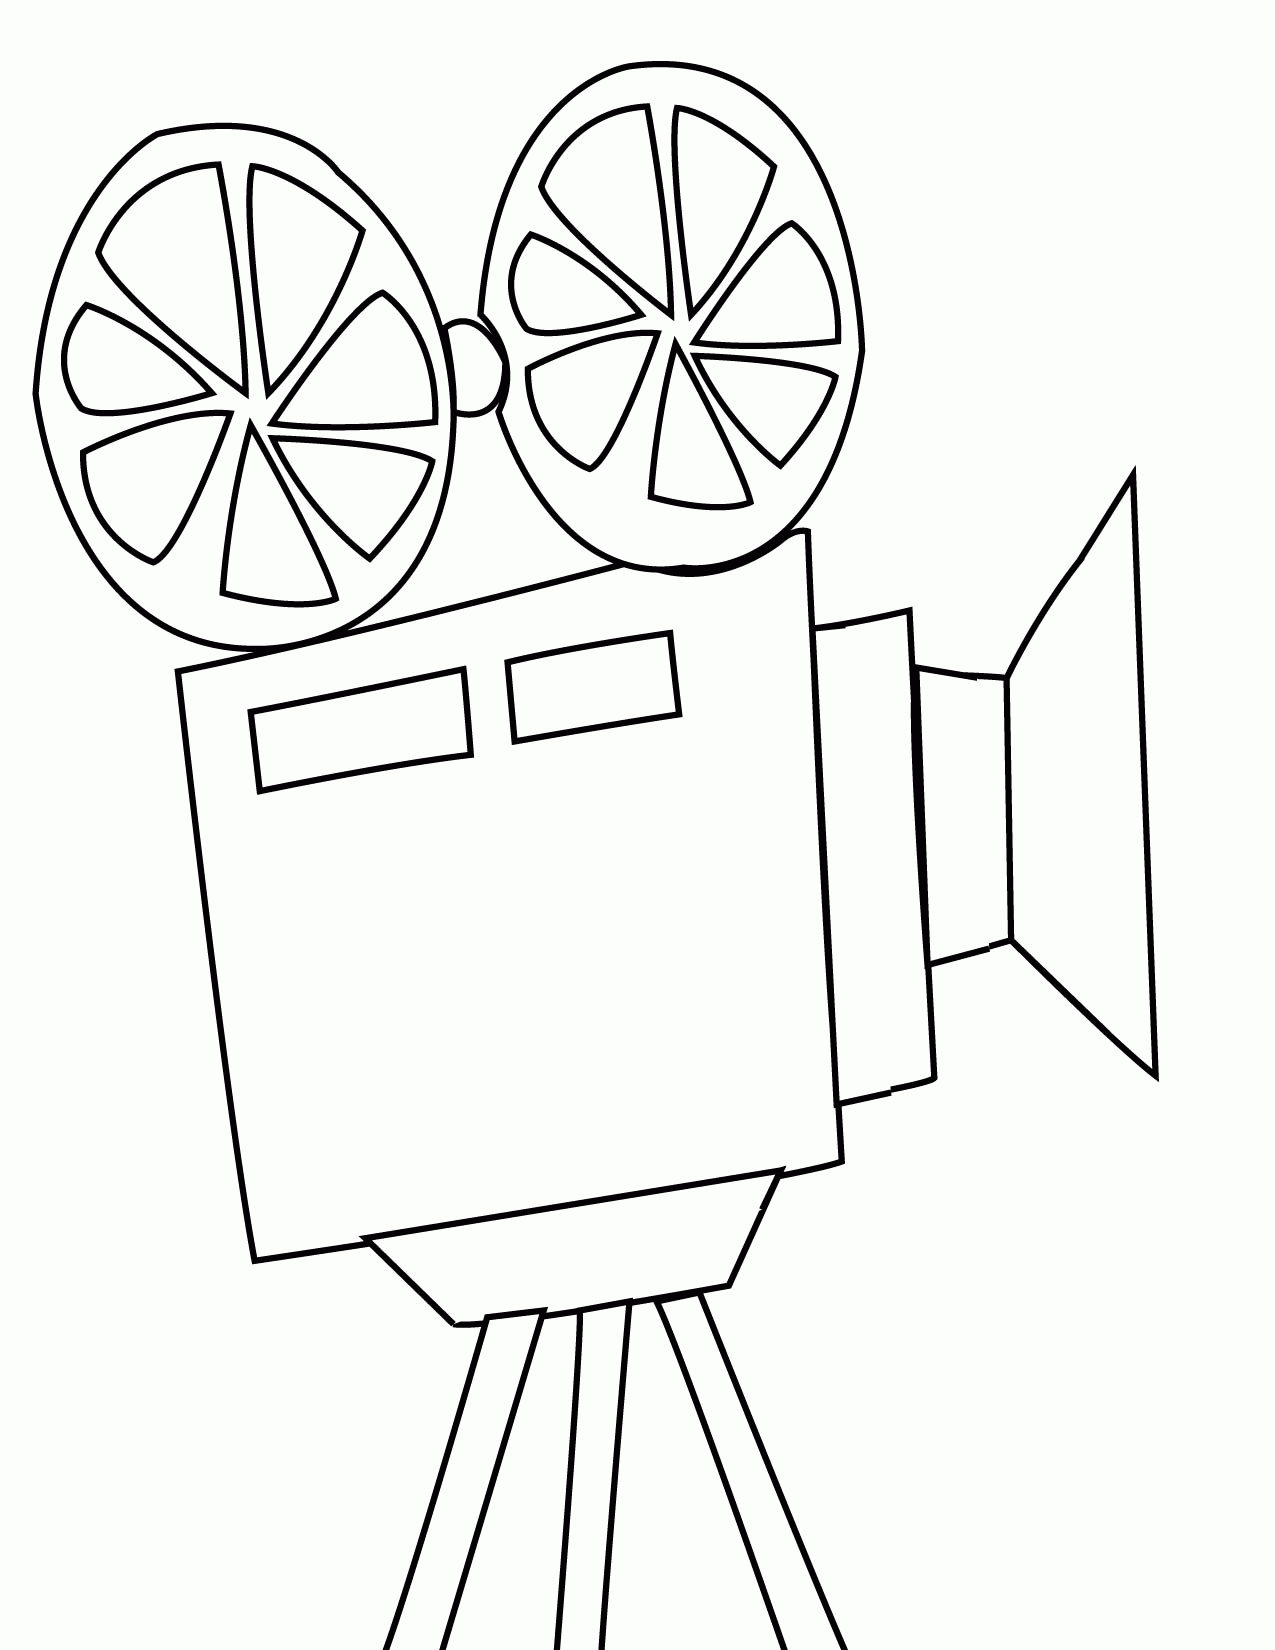 Camera movies coloring pages - coloring book - Free Coloring Pages